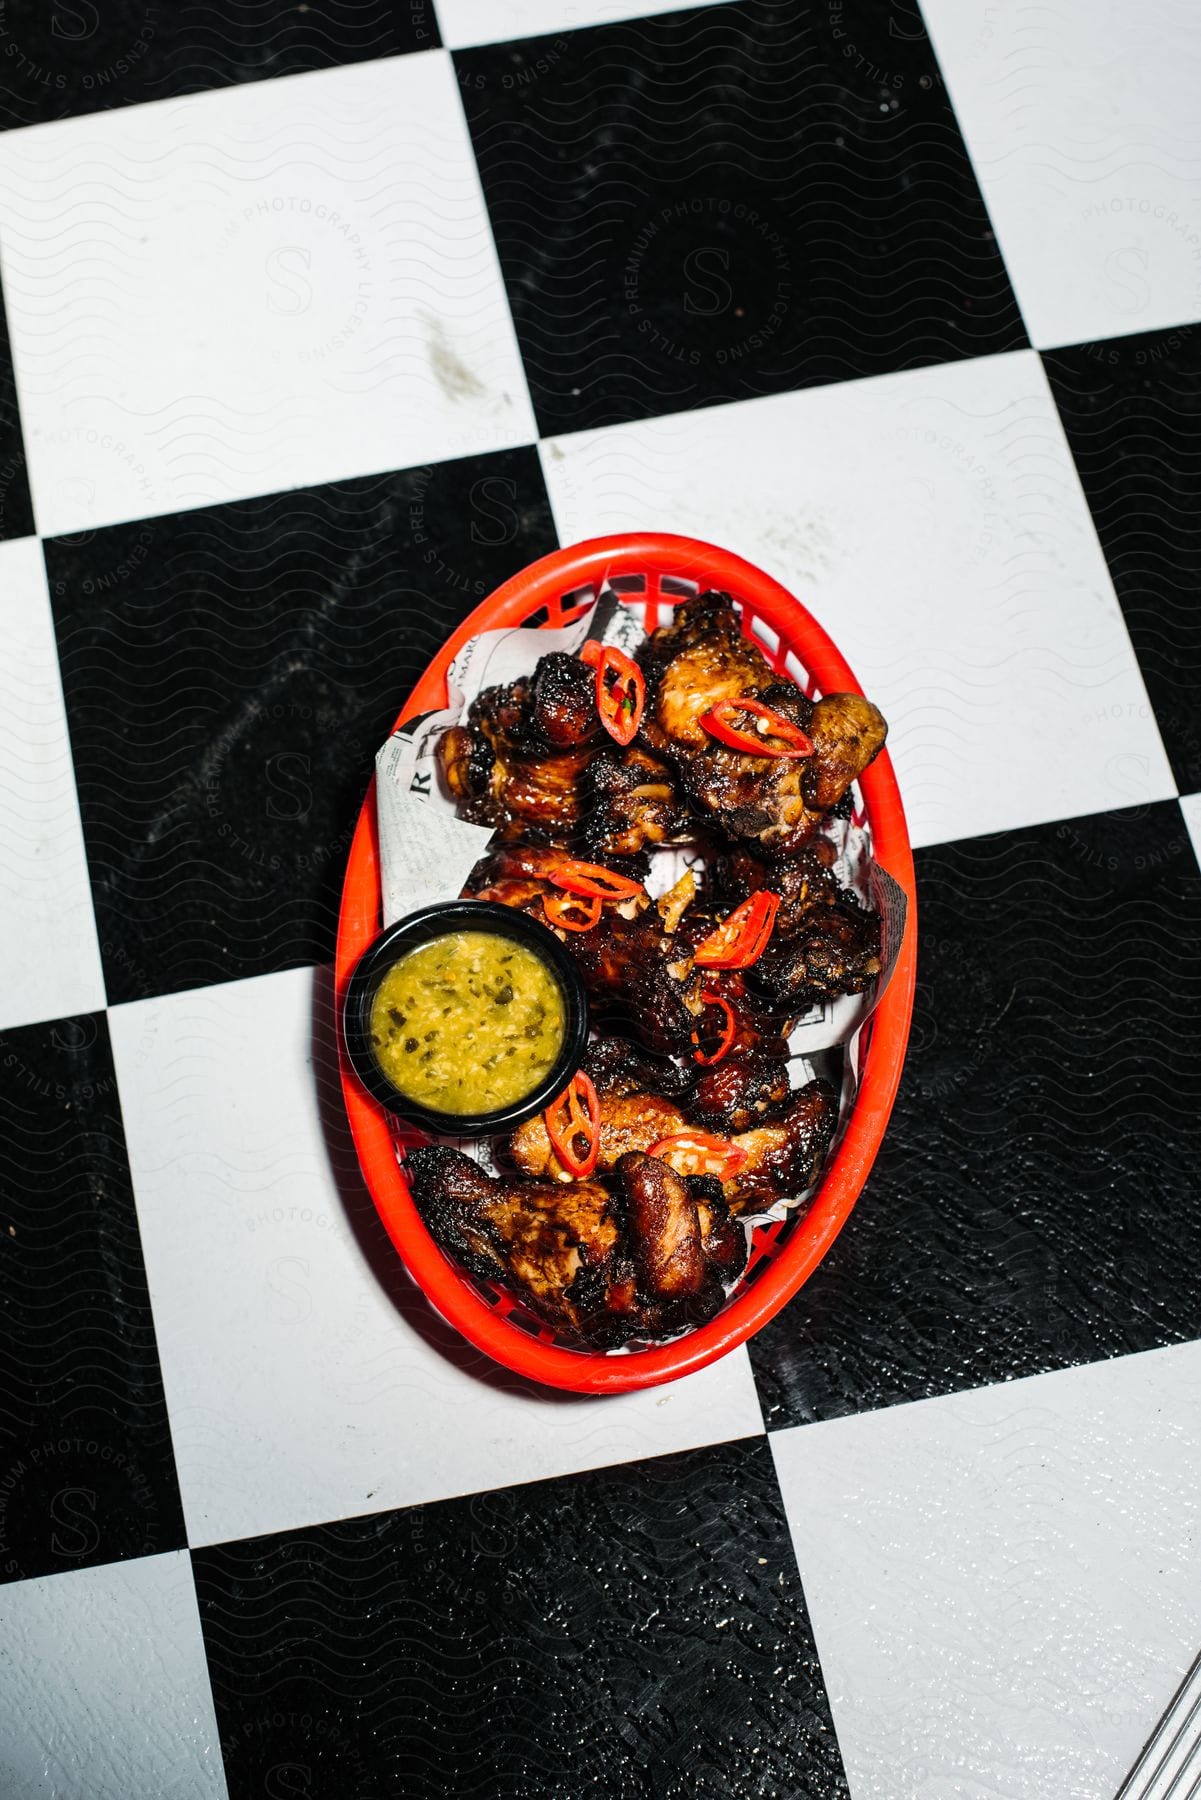 Grilled chicken pieces presented in a red basket